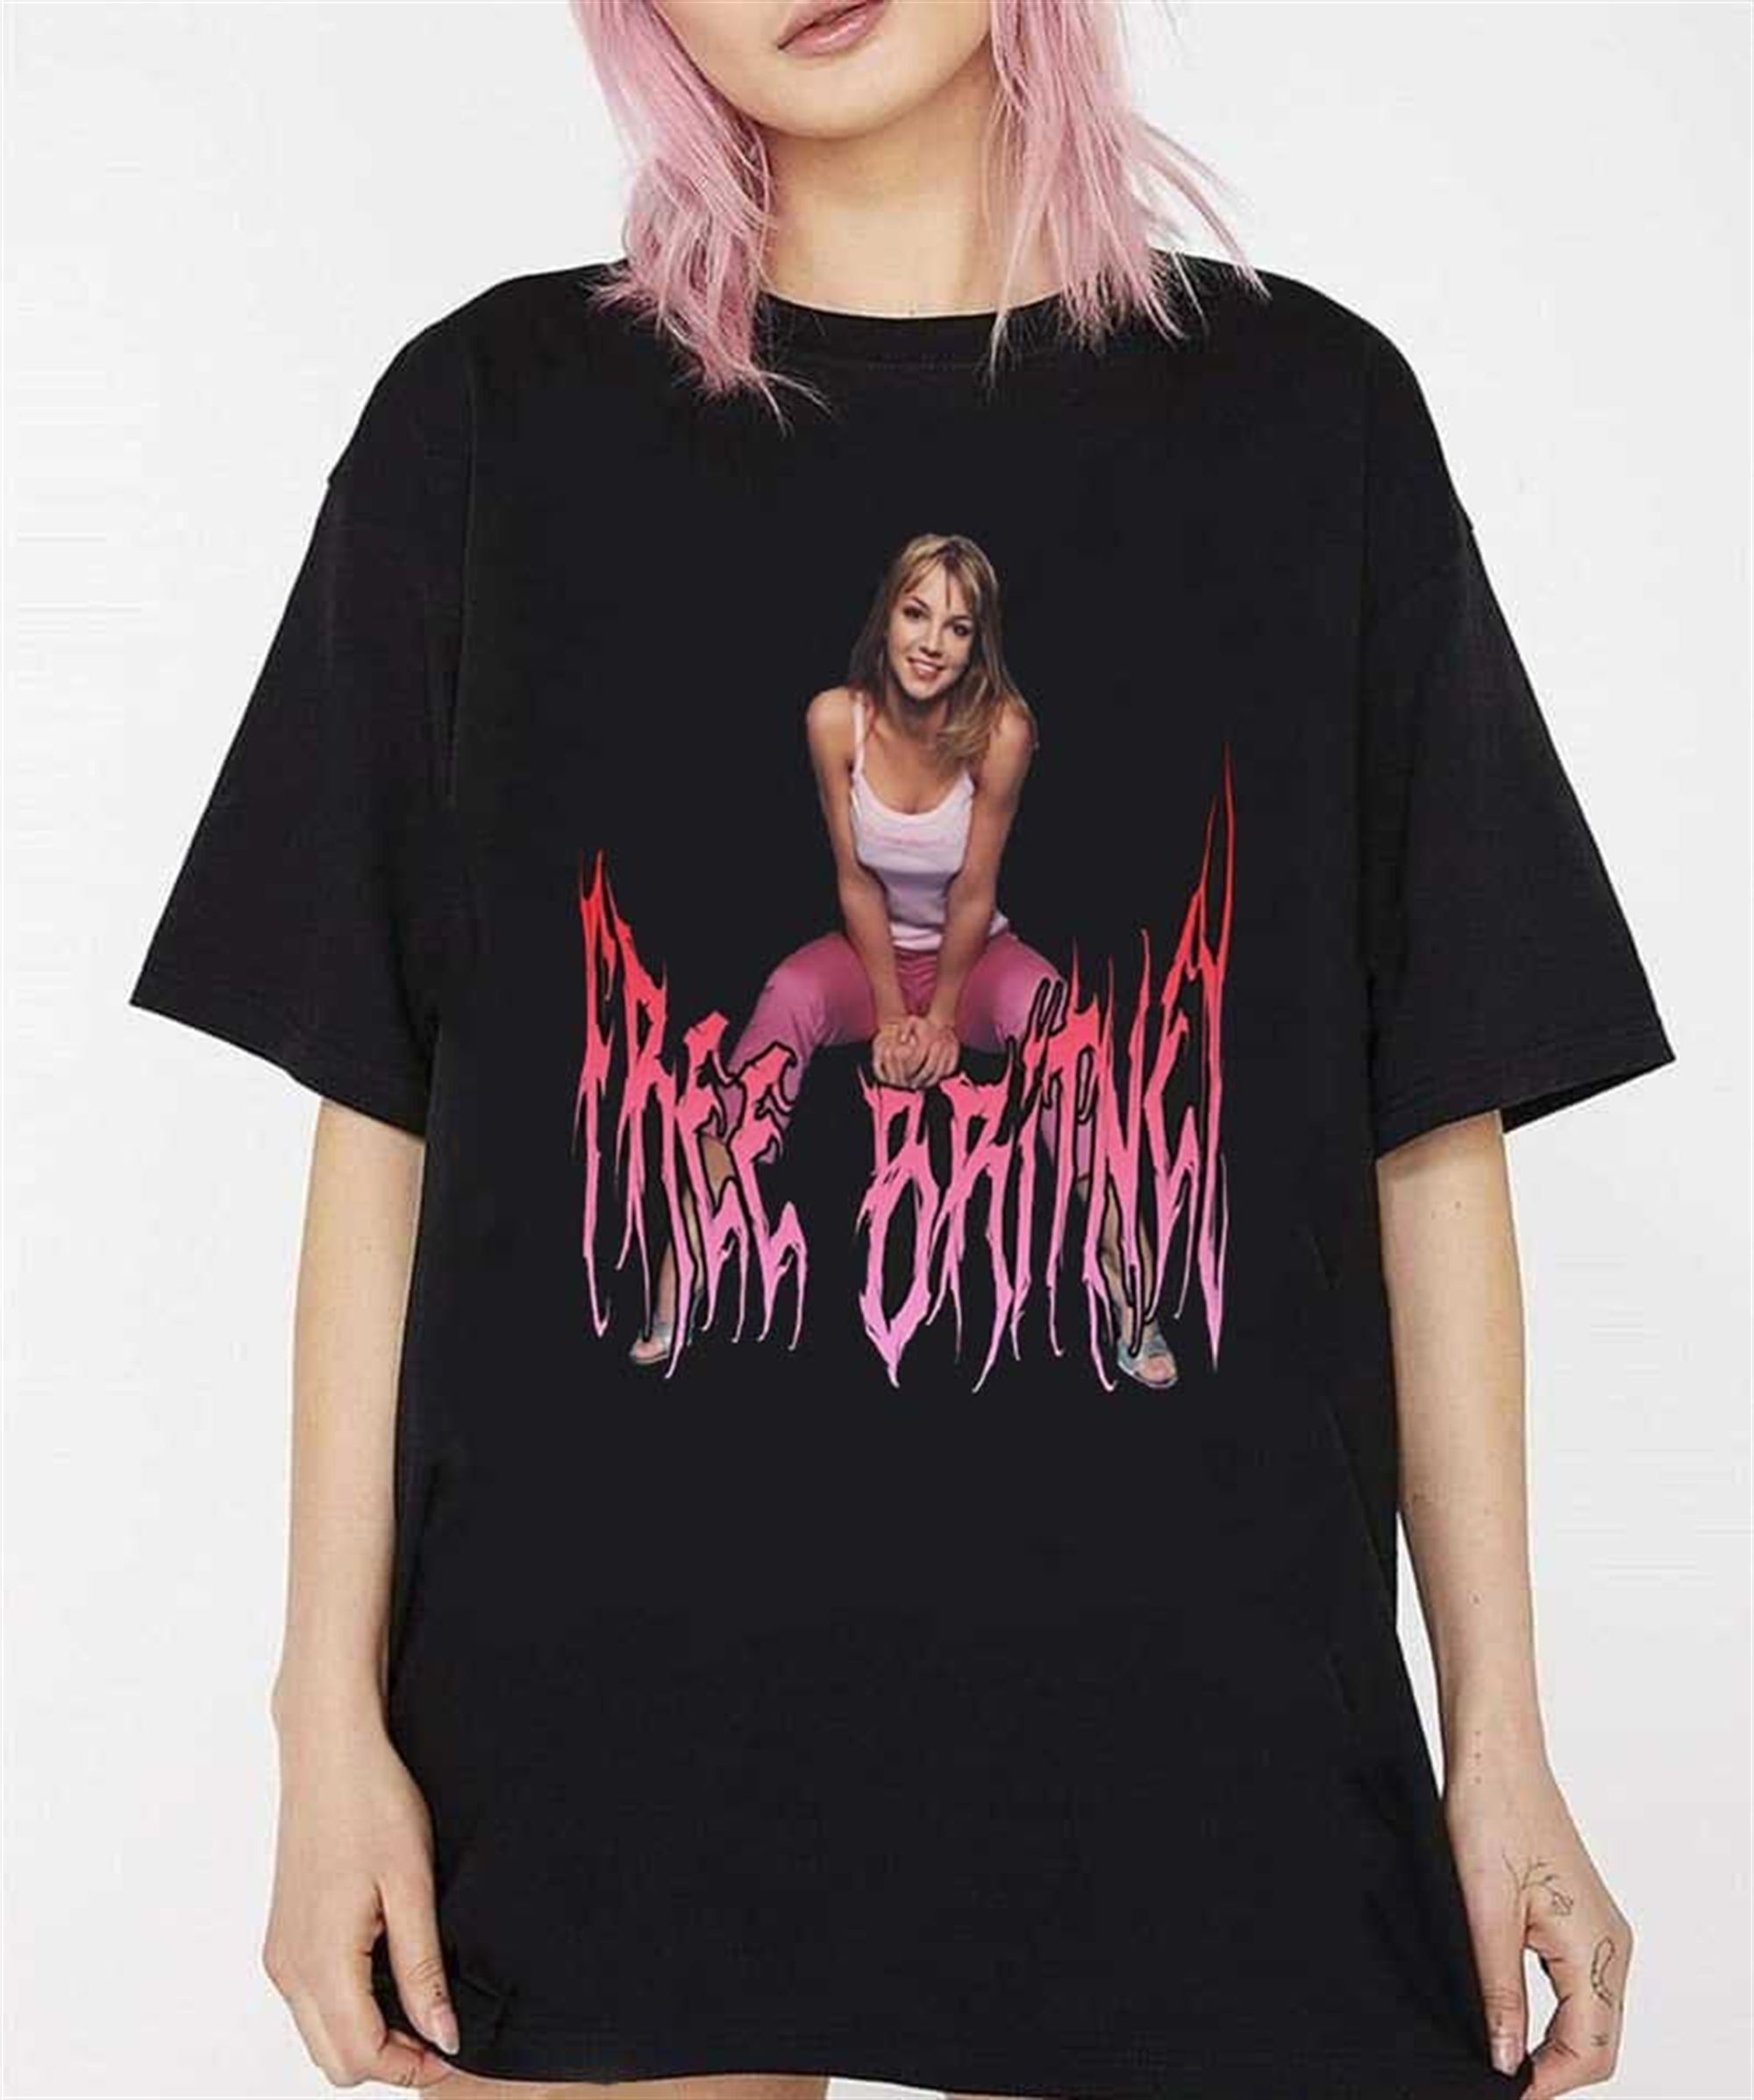 Britney Spear Shirt Free Britney Shirt Heavy Metal Britney Spears Smash The Patriarchy Free Britney Movement Intersectional Feminism Ha